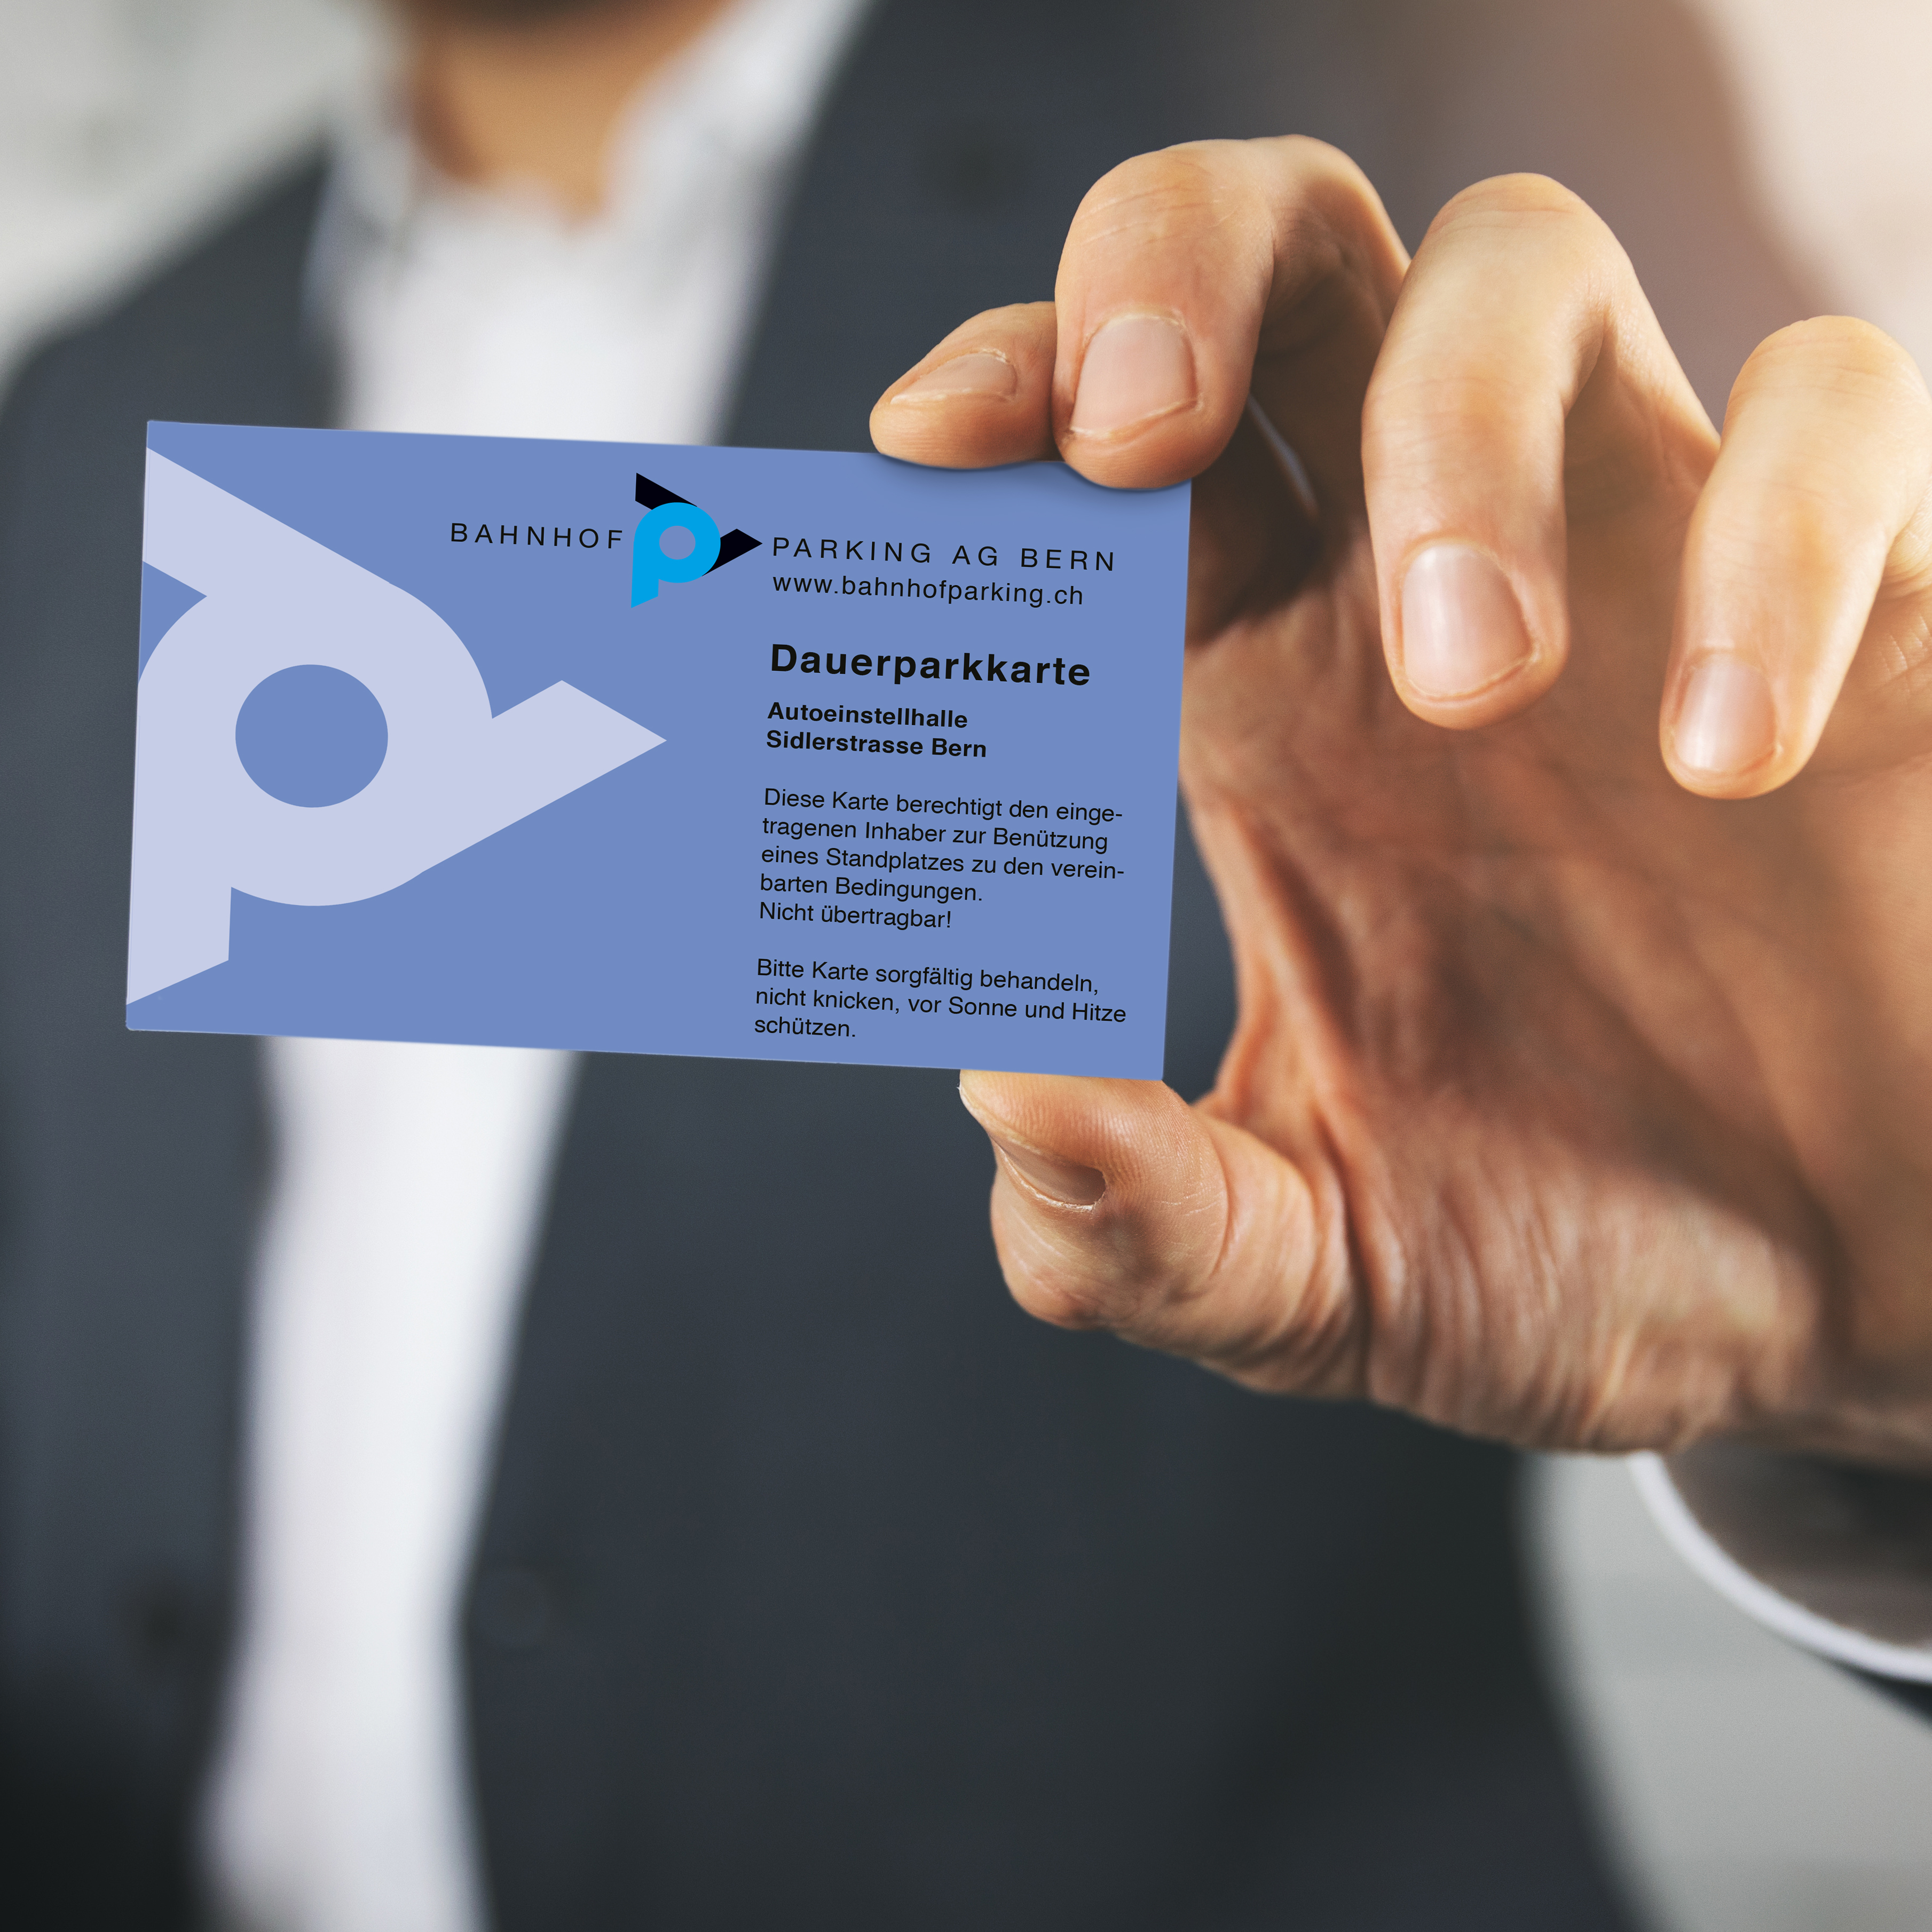 businessman hand showing blank white business card closeup